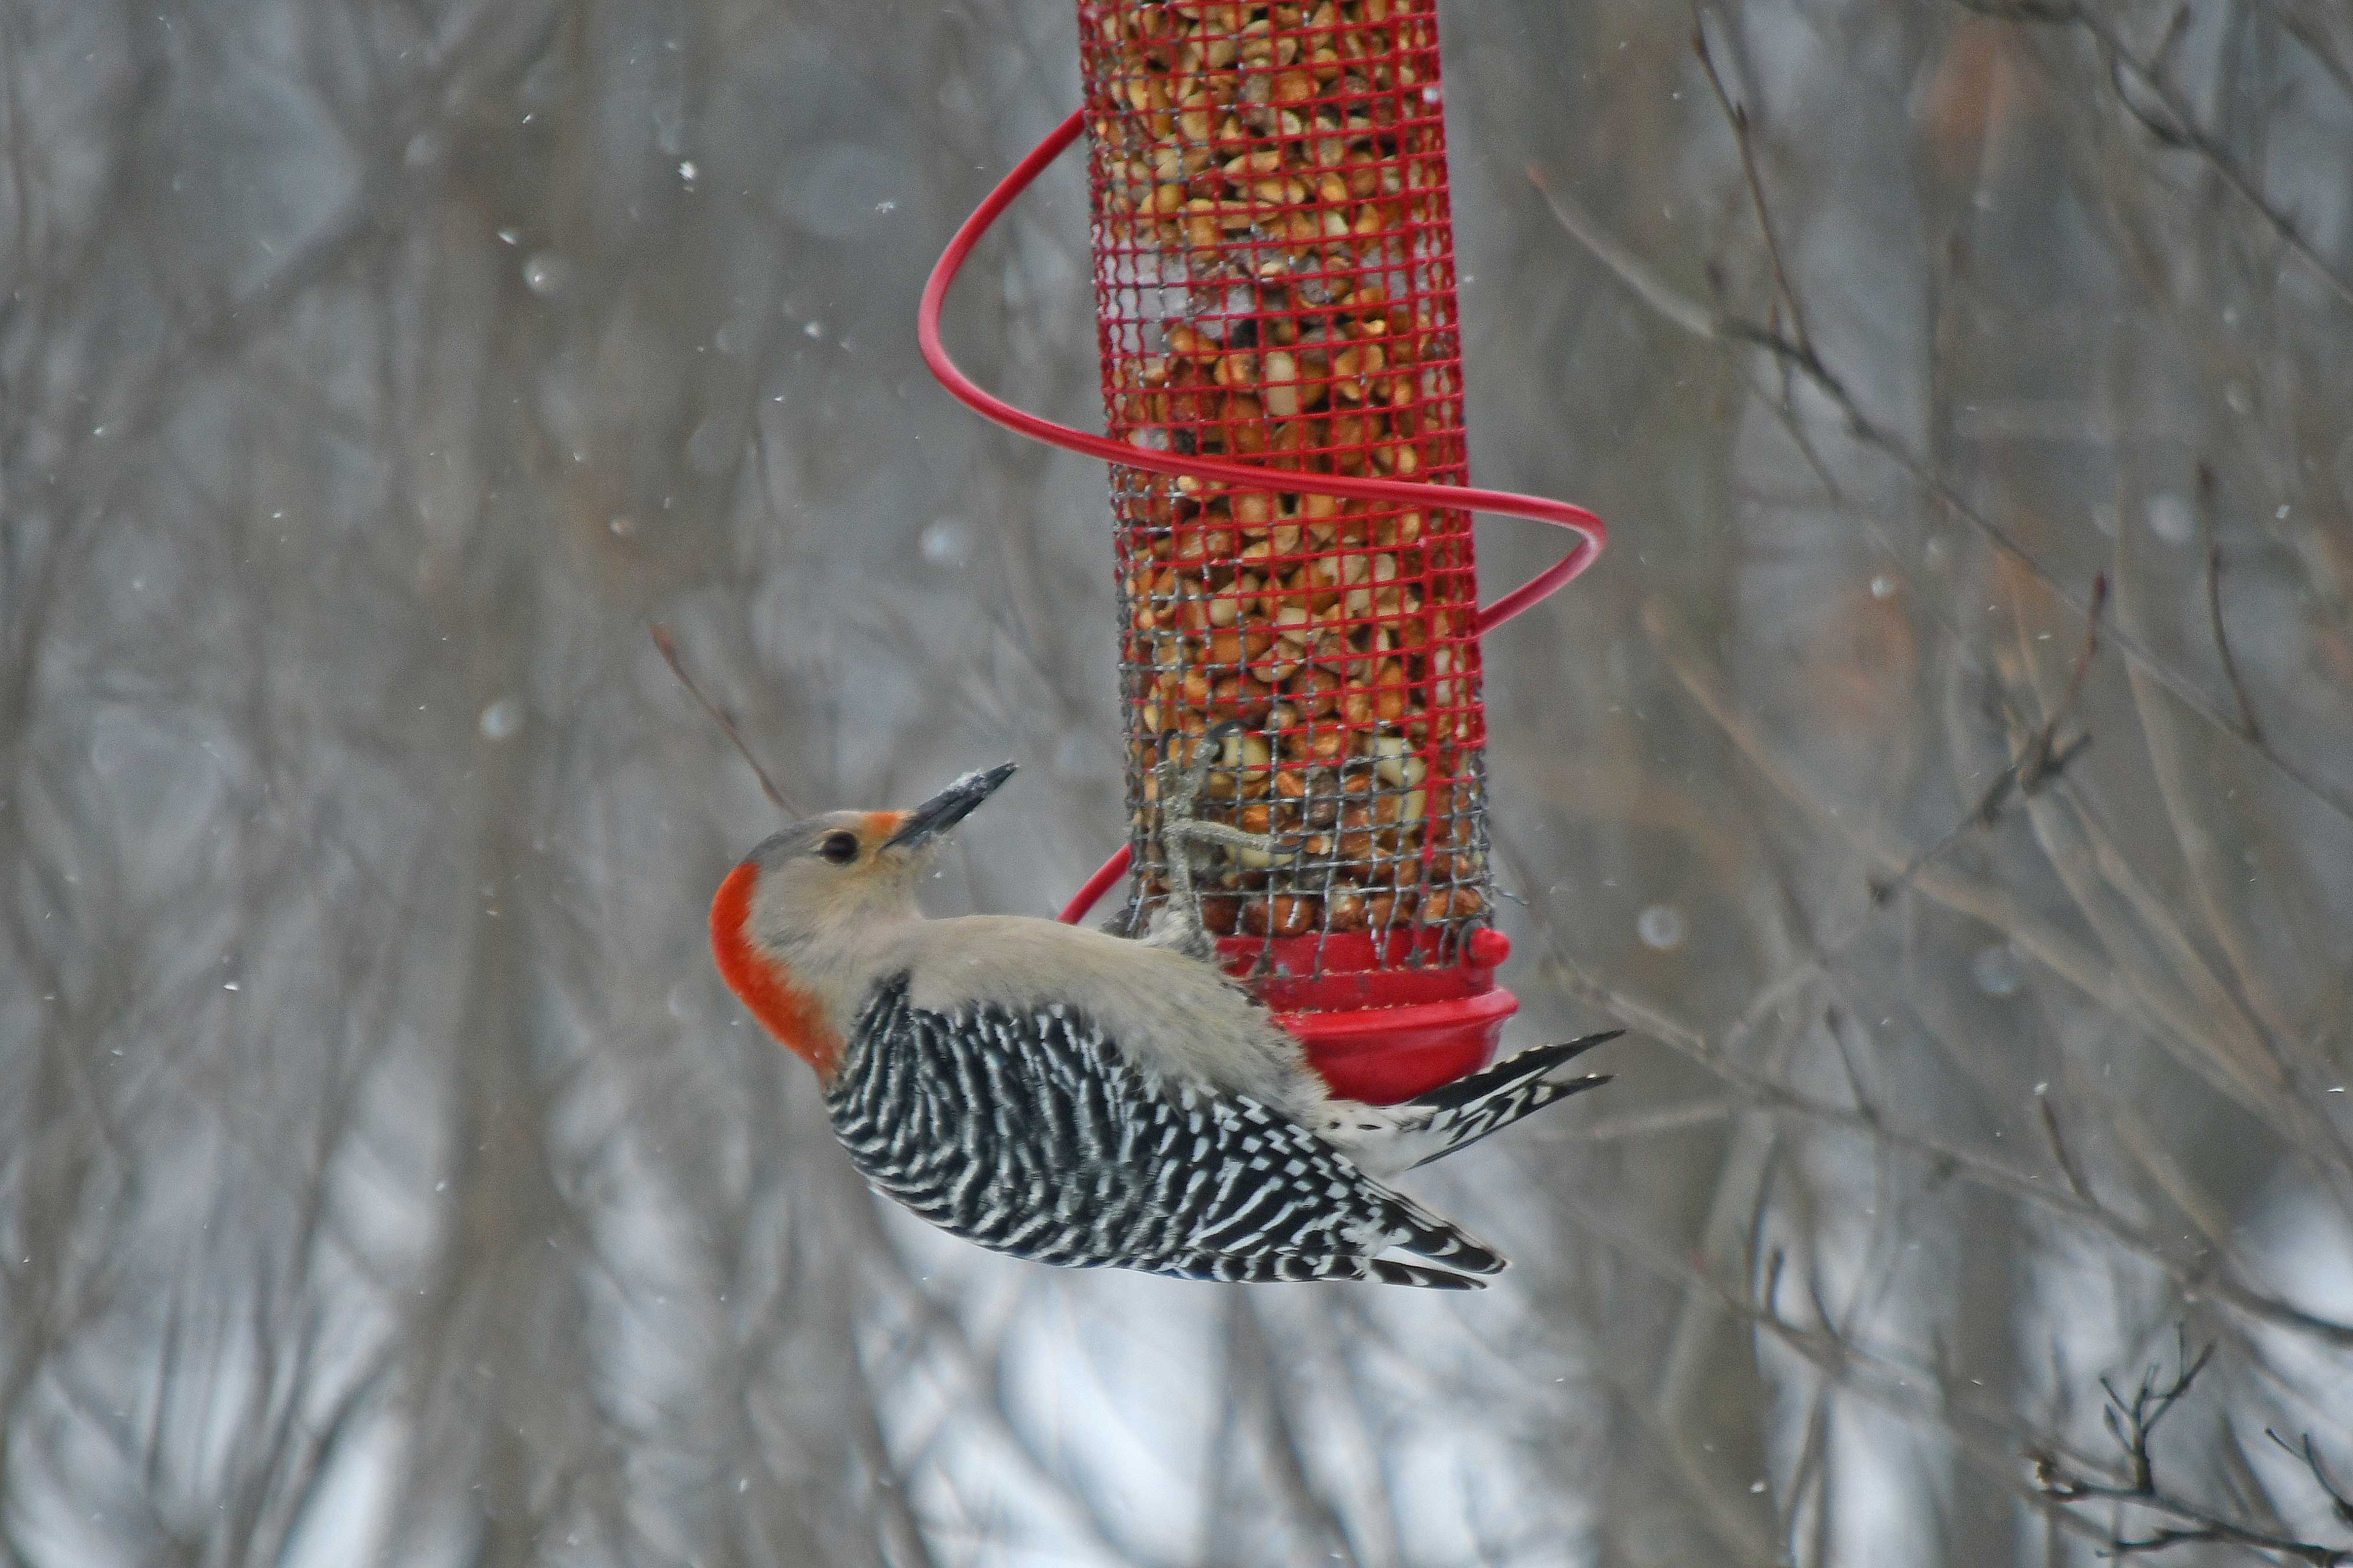 A red-bellied woodpecker at a feeder.